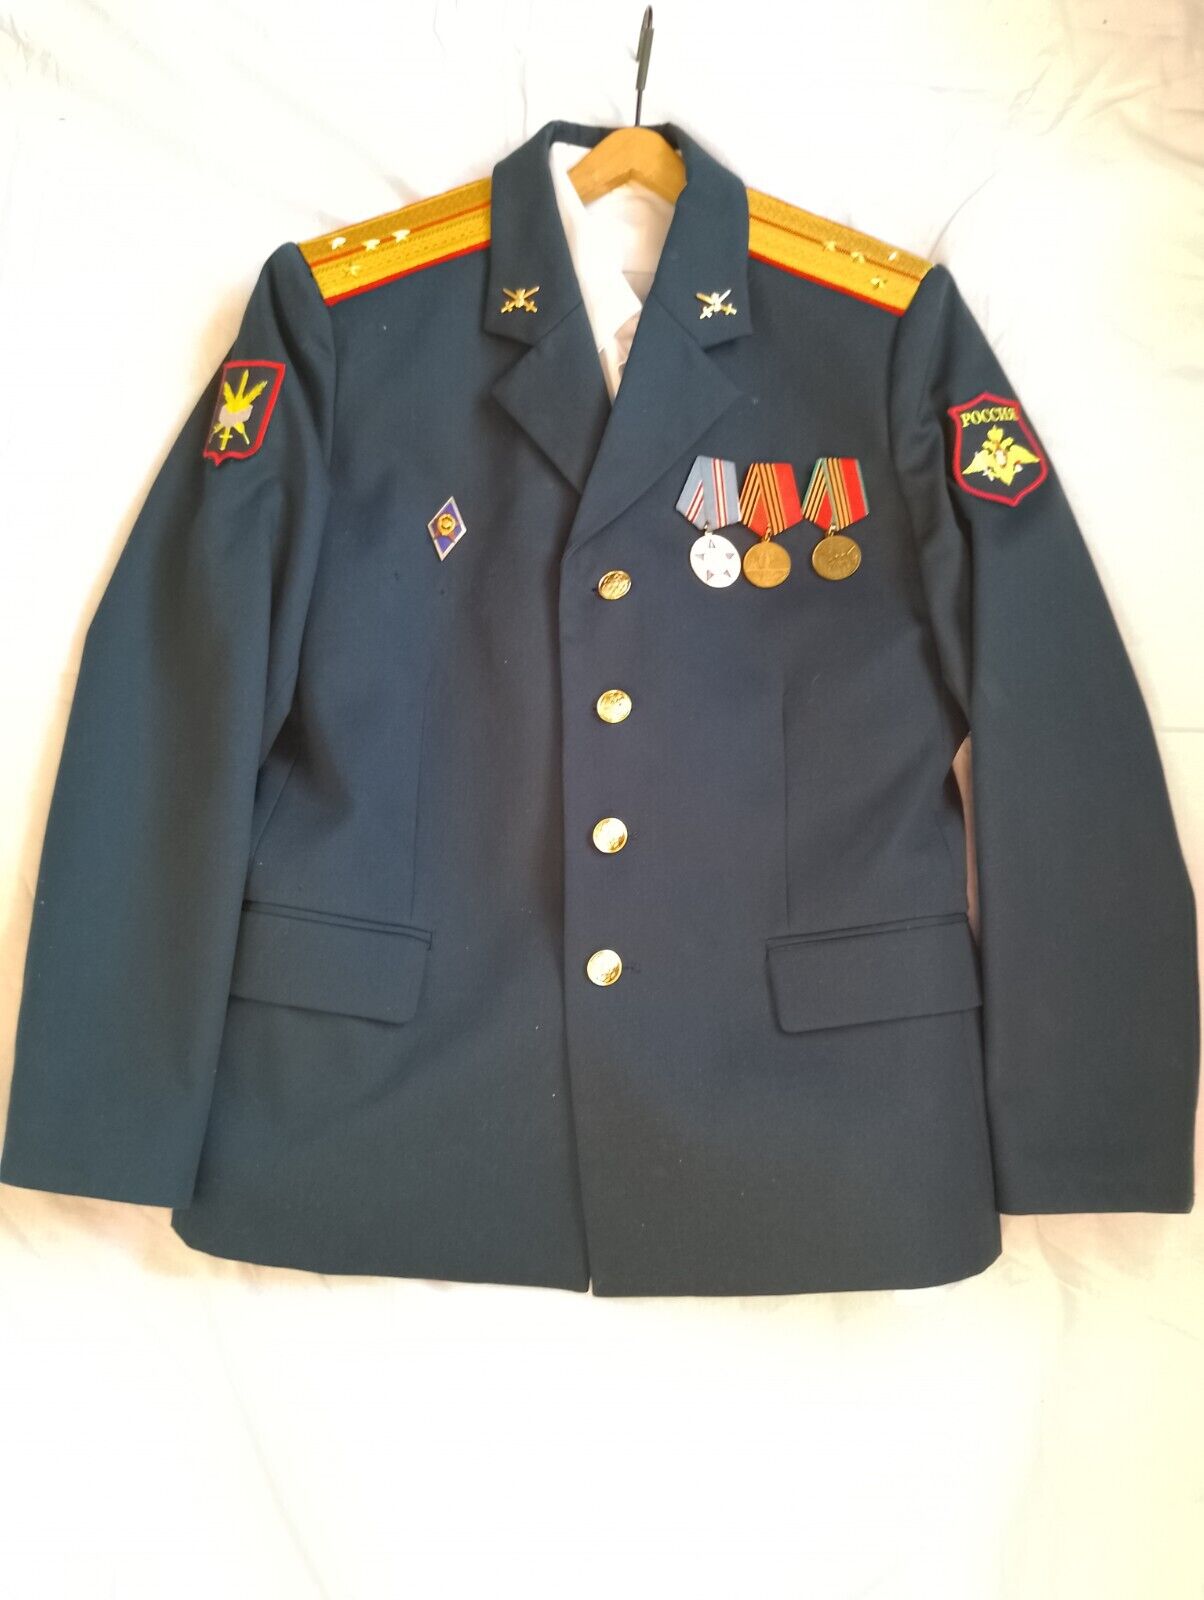 2005, Parade military costume of an officer, captain Russian Army. Awards.